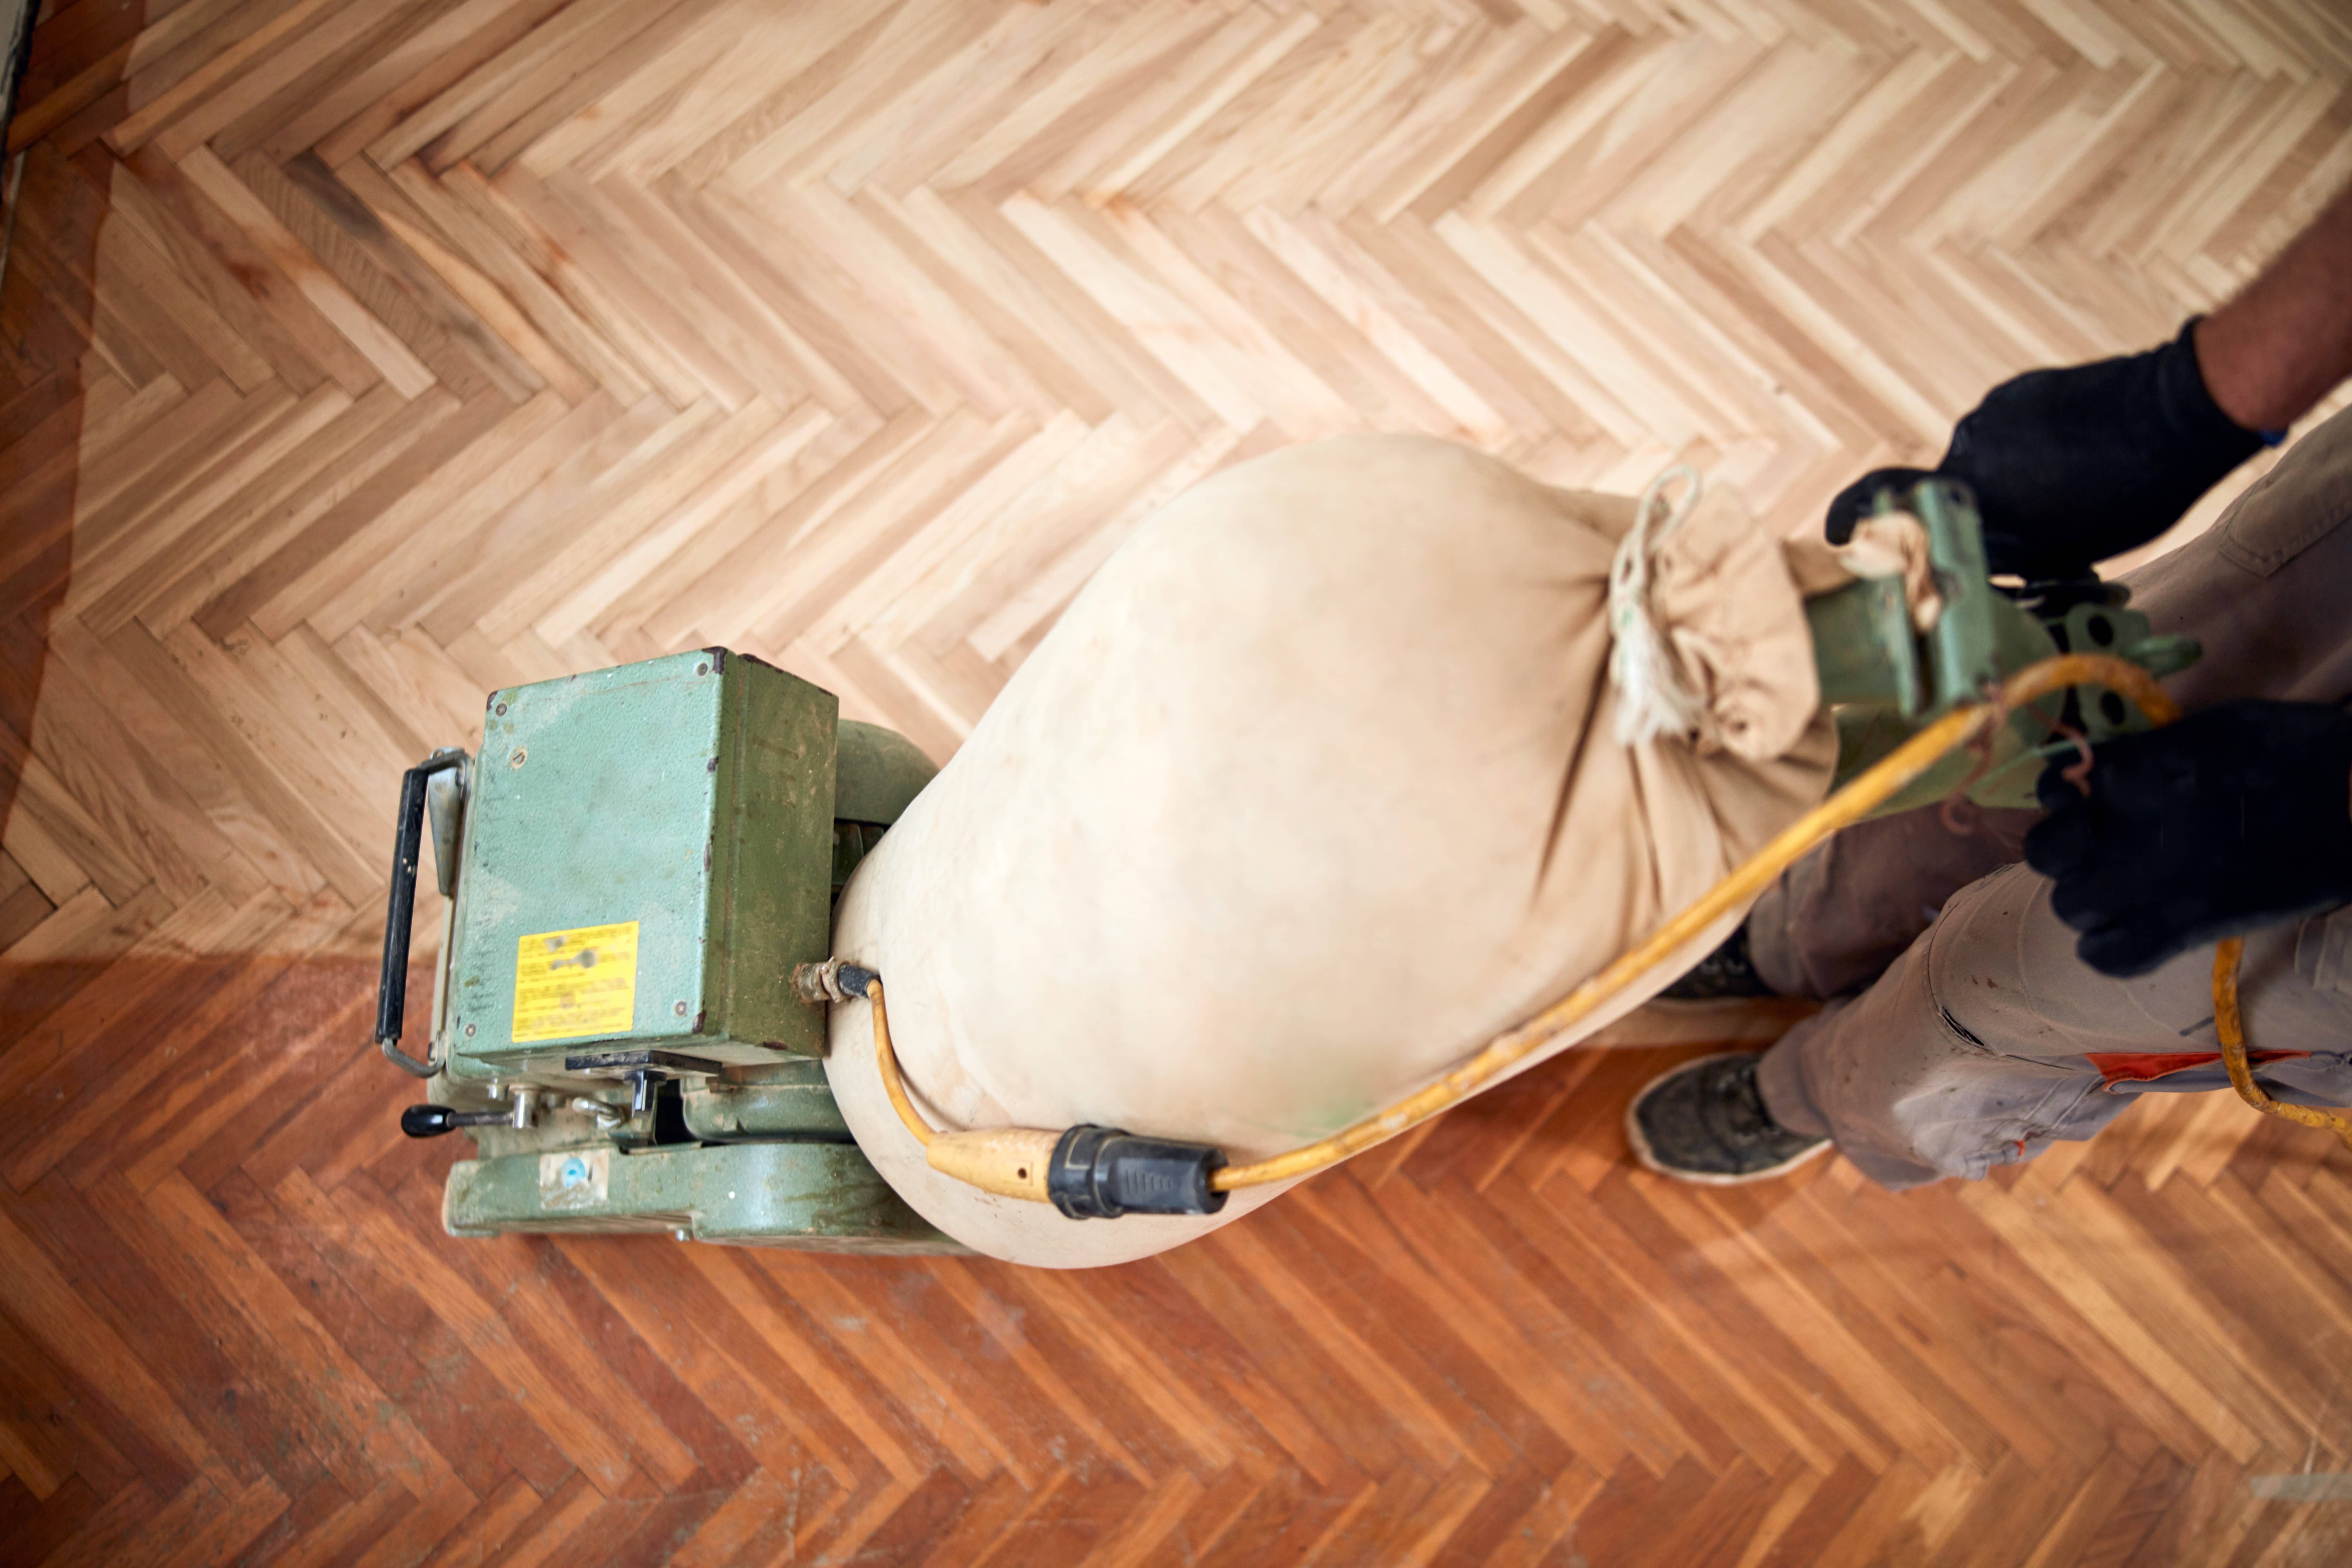 In Streatham, SW16, Professional Mr Sander® sanding a herringbone floor using the powerful and compact Bona Belt Lite belt sander. With a 2.2 kW motor, 230V voltage, and 50Hz frequency, this efficient sander measures 200x750 mm in size. The sander is connected to a dust extraction system equipped with a HEPA filter, ensuring a clean and efficient result. 